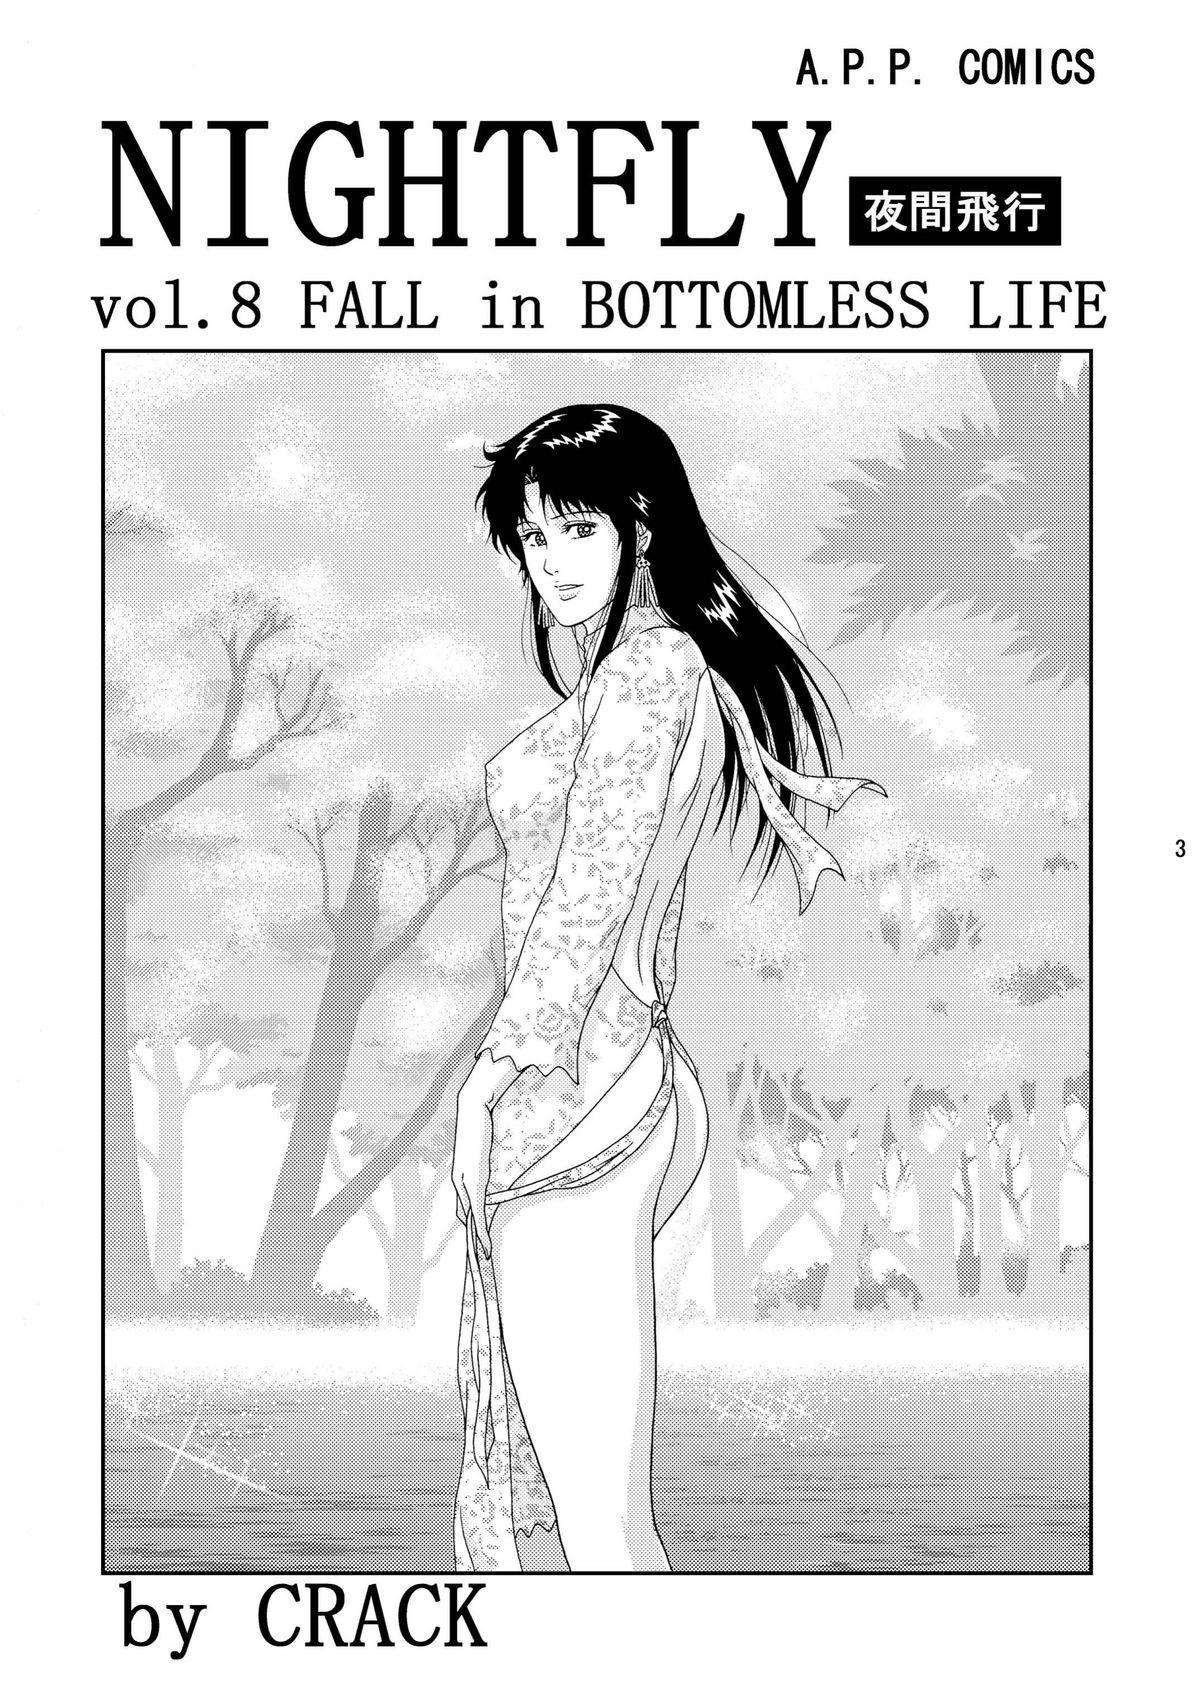 NIGHTFLY vol.8 FALL in BOTTOMLESS LIFE 2